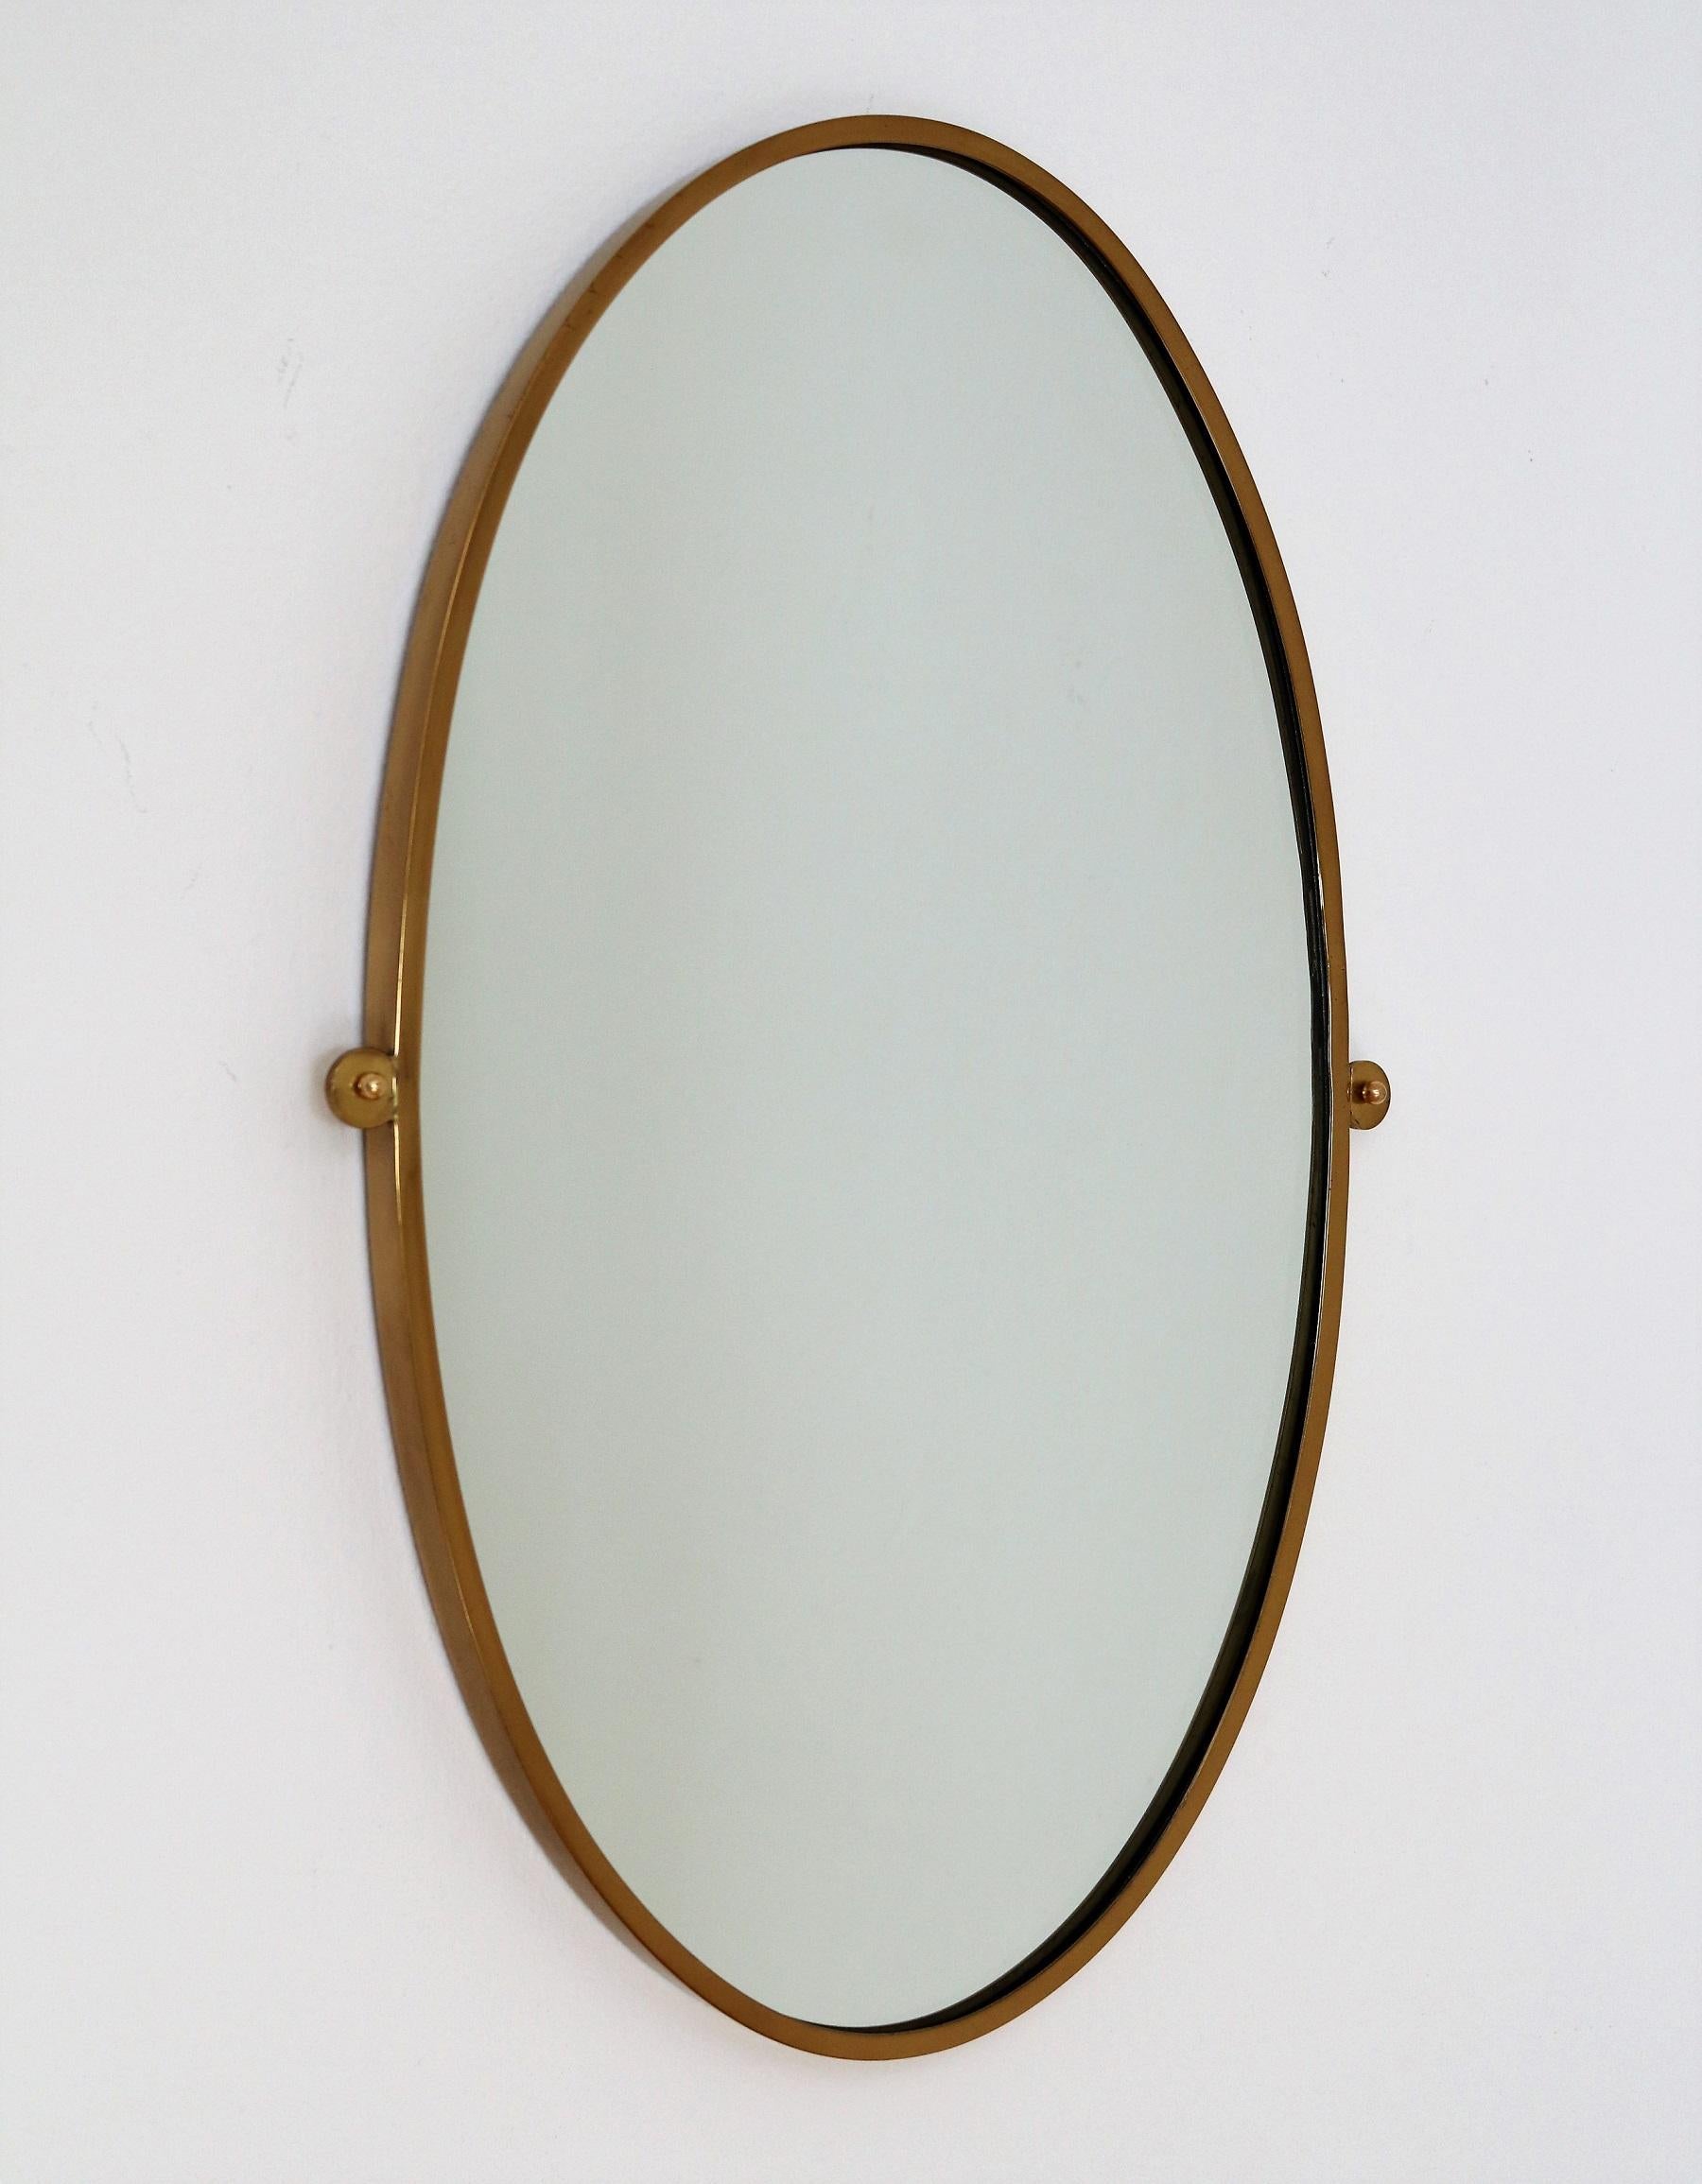 Mid-Century Modern Italian Midcentury Oval Wall Mirror with Brass Frame and Details, 1970s